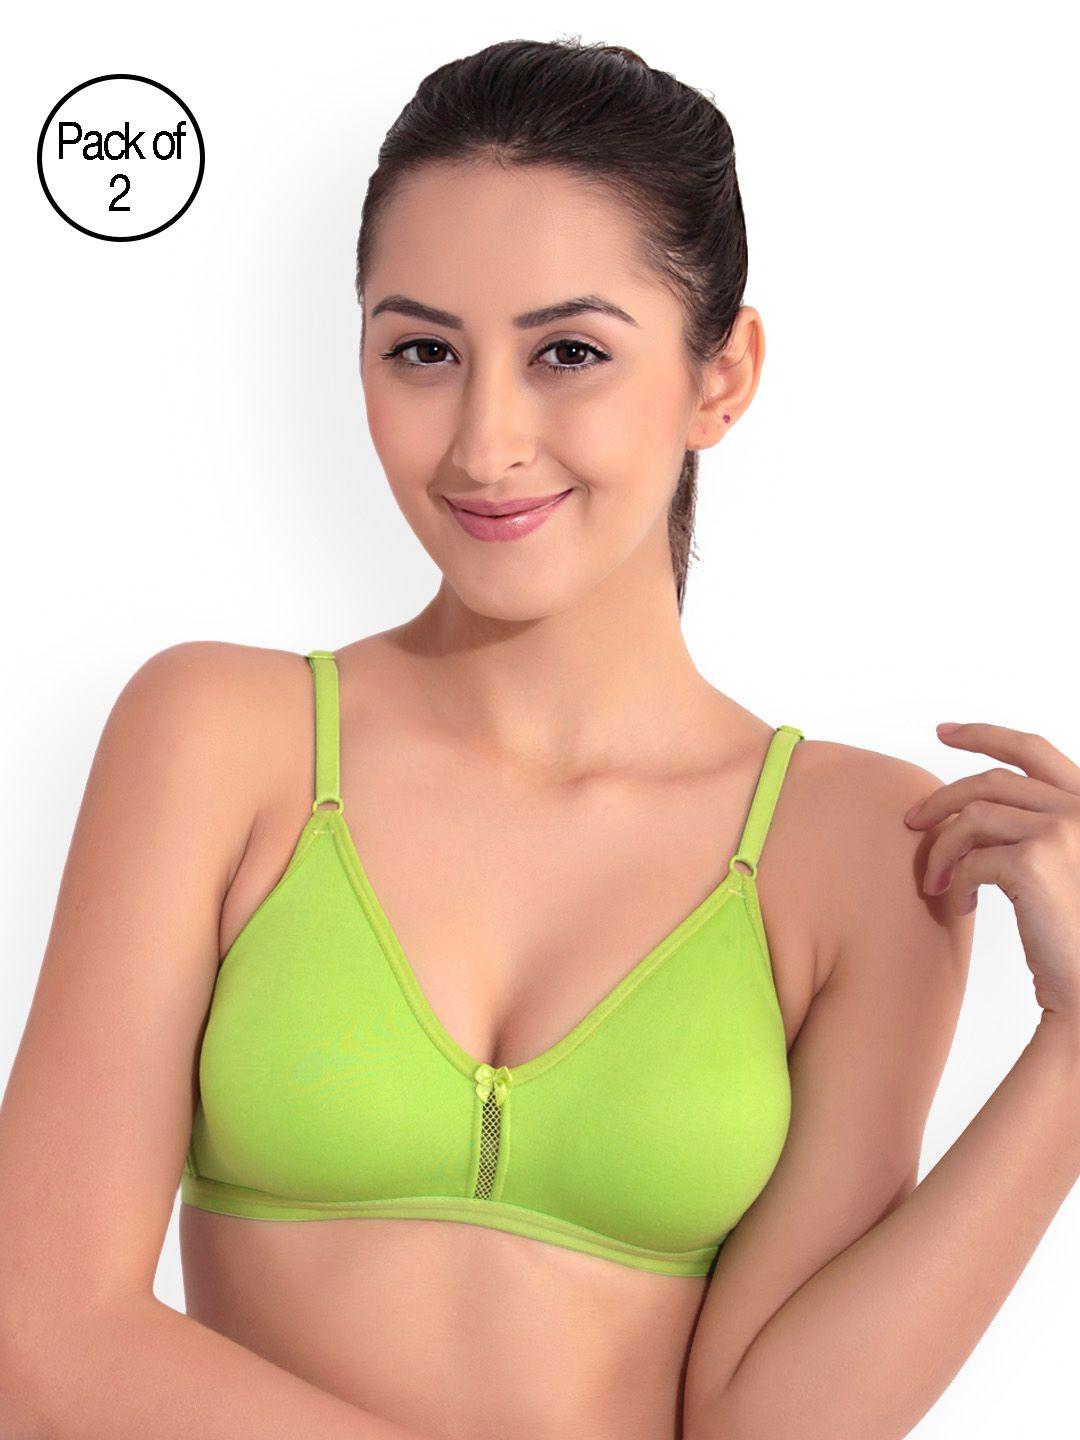 floret-pack-of-2-lime-green-solid-non-wired-non-padded-t-shirt-bras